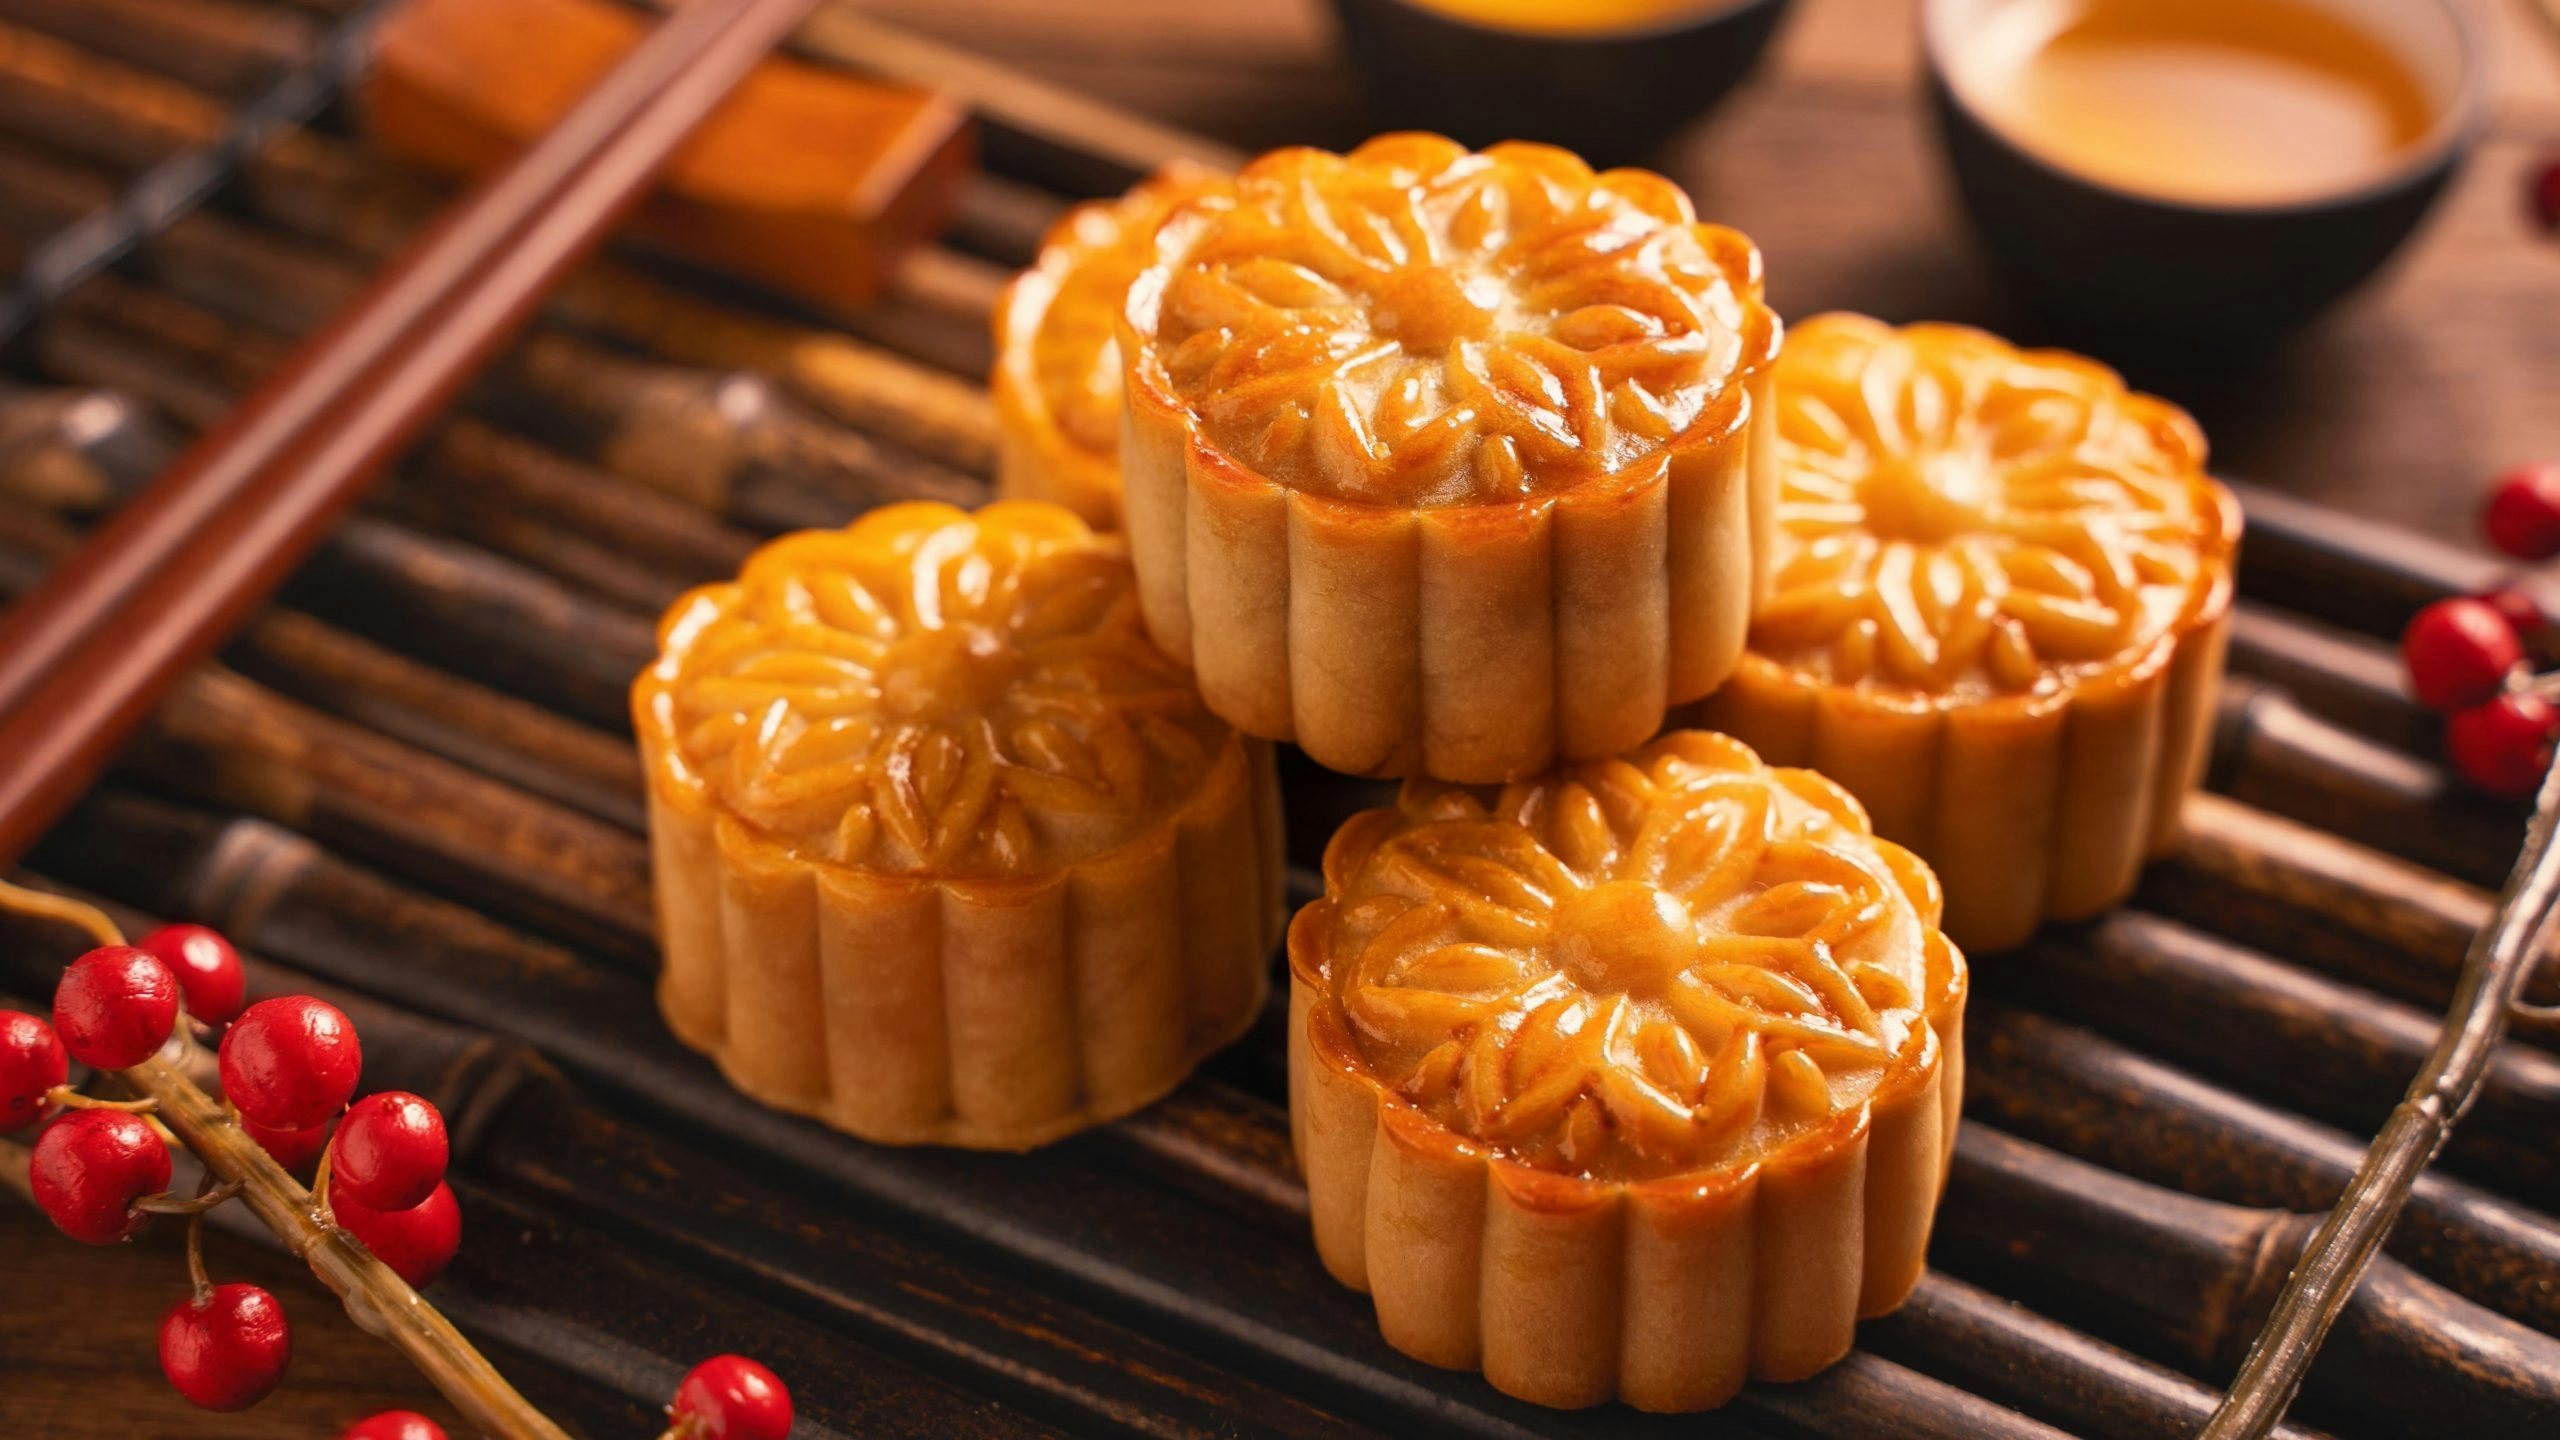 Chinese regulators are cracking down on overpriced mooncakes for contributing to extravagance and waste. With the Mid-Autumn Festival around the corner, how will this affect brands? Photo: Shutterstock